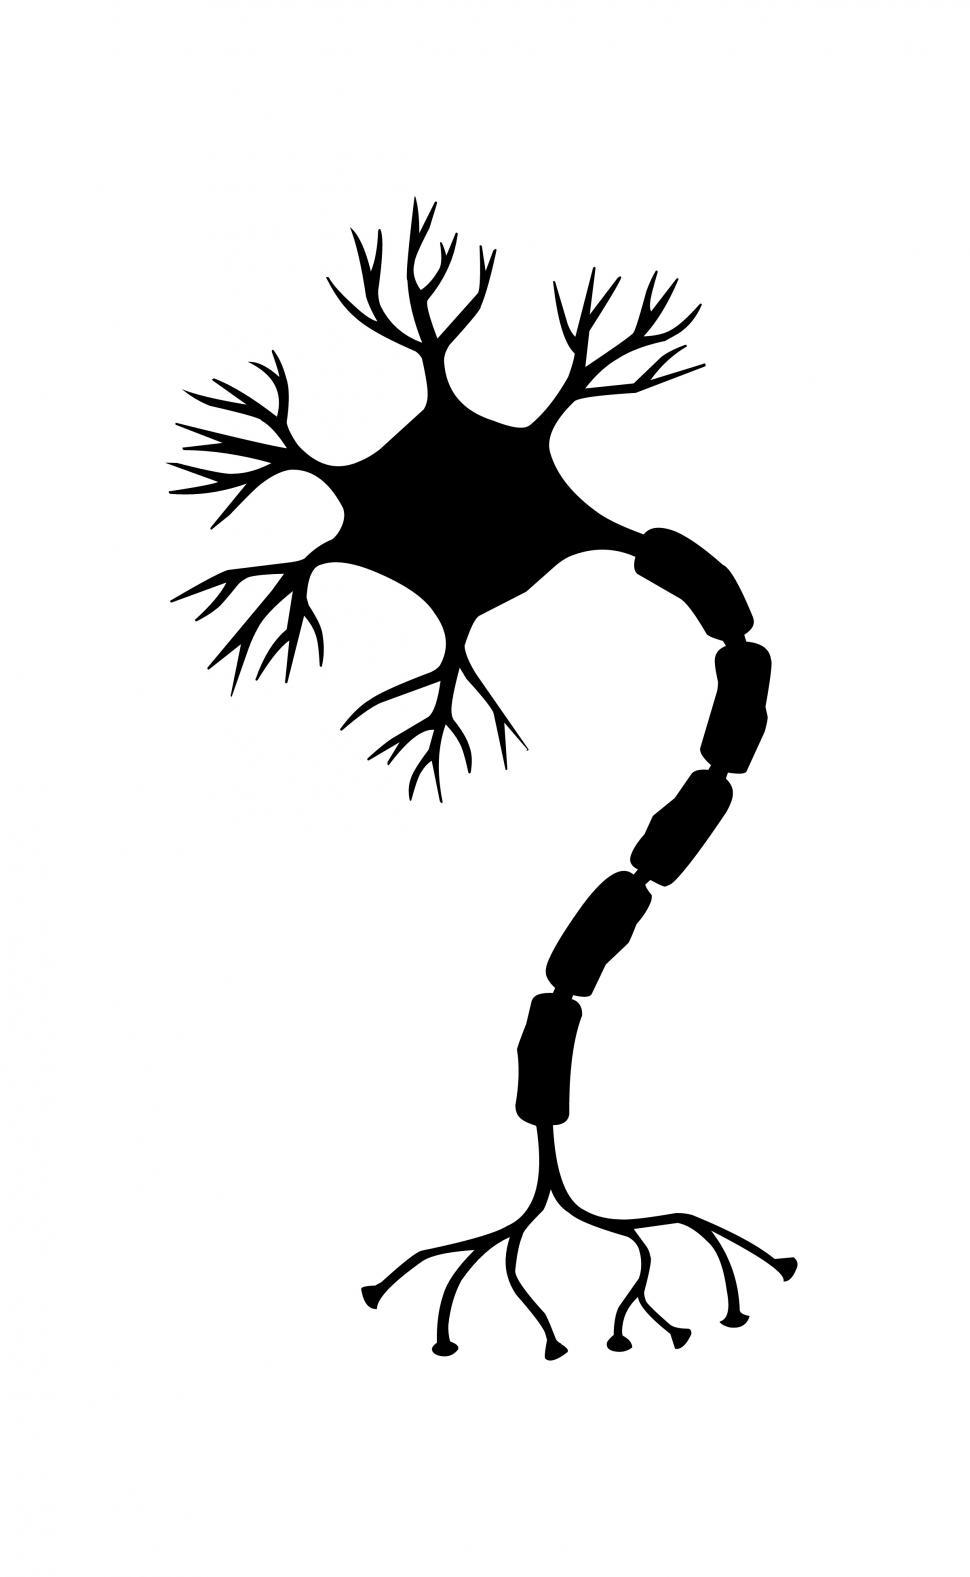 Free Image of nerve cell Silhouette  